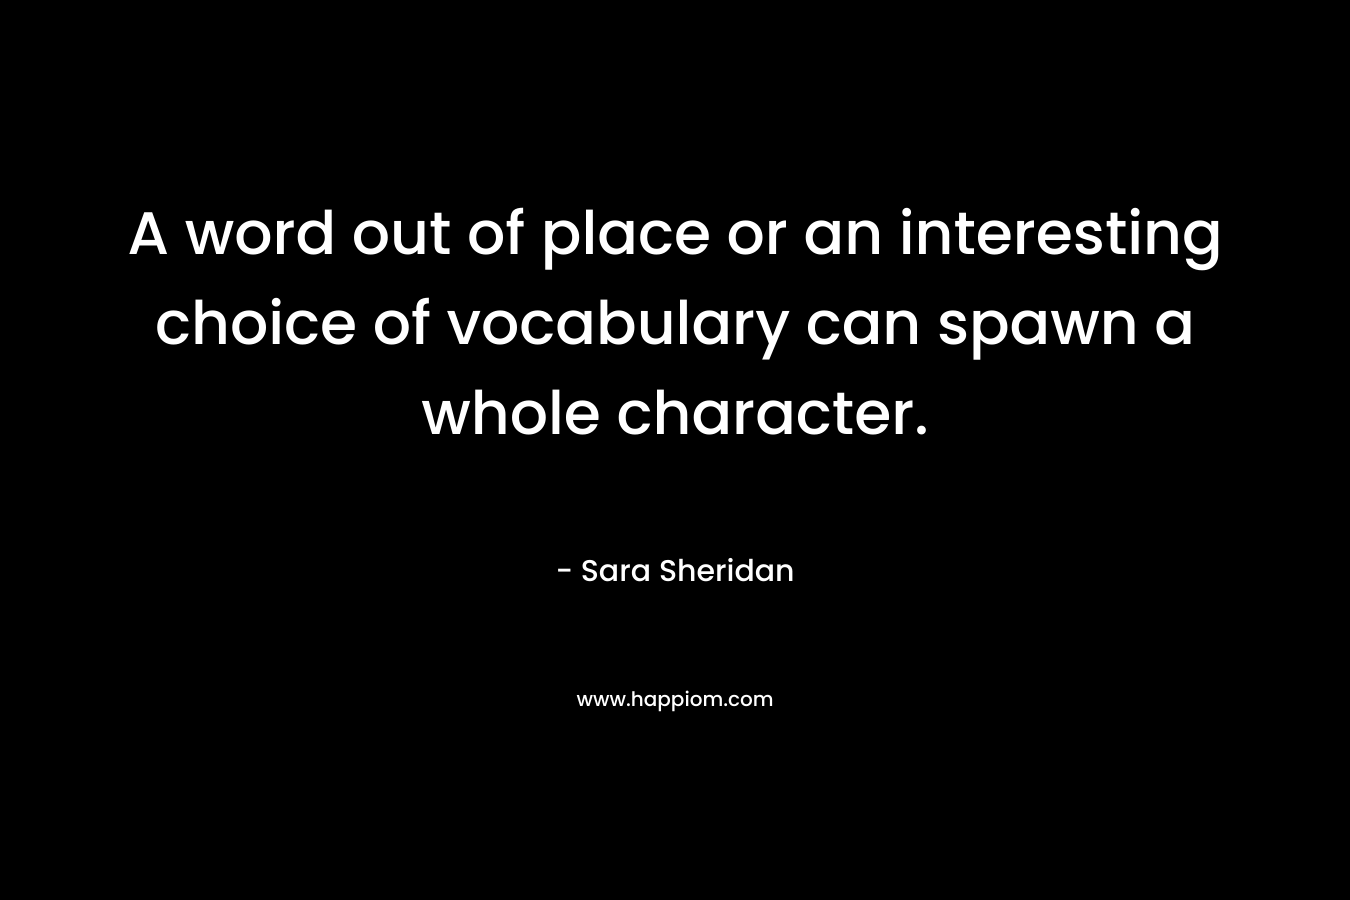 A word out of place or an interesting choice of vocabulary can spawn a whole character.